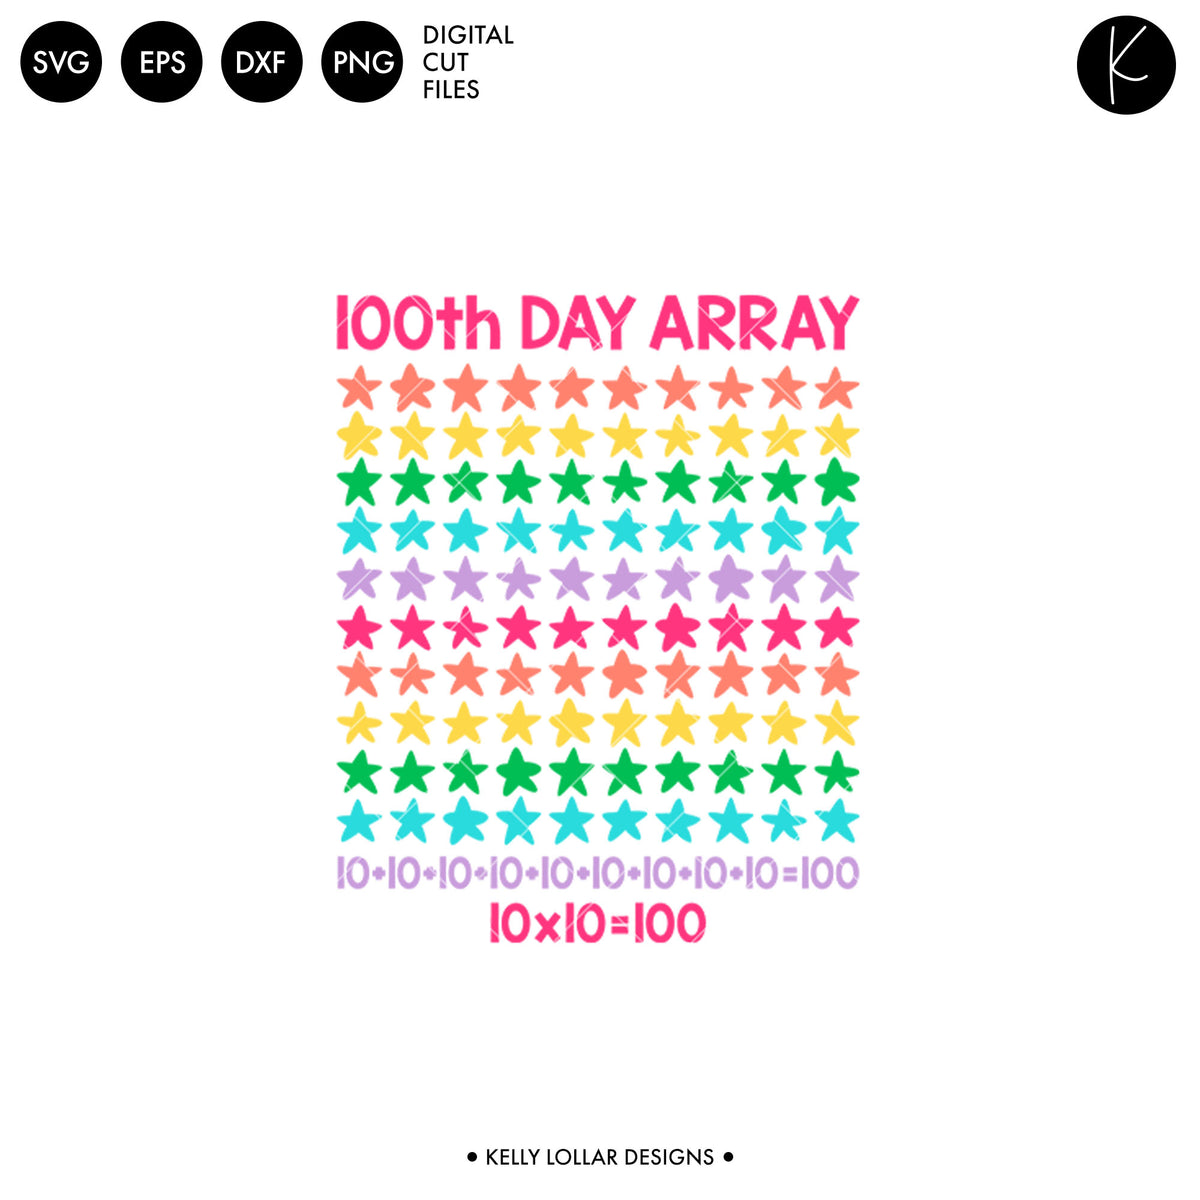 100th Day Array | SVG DXF EPS PNG Cut Files